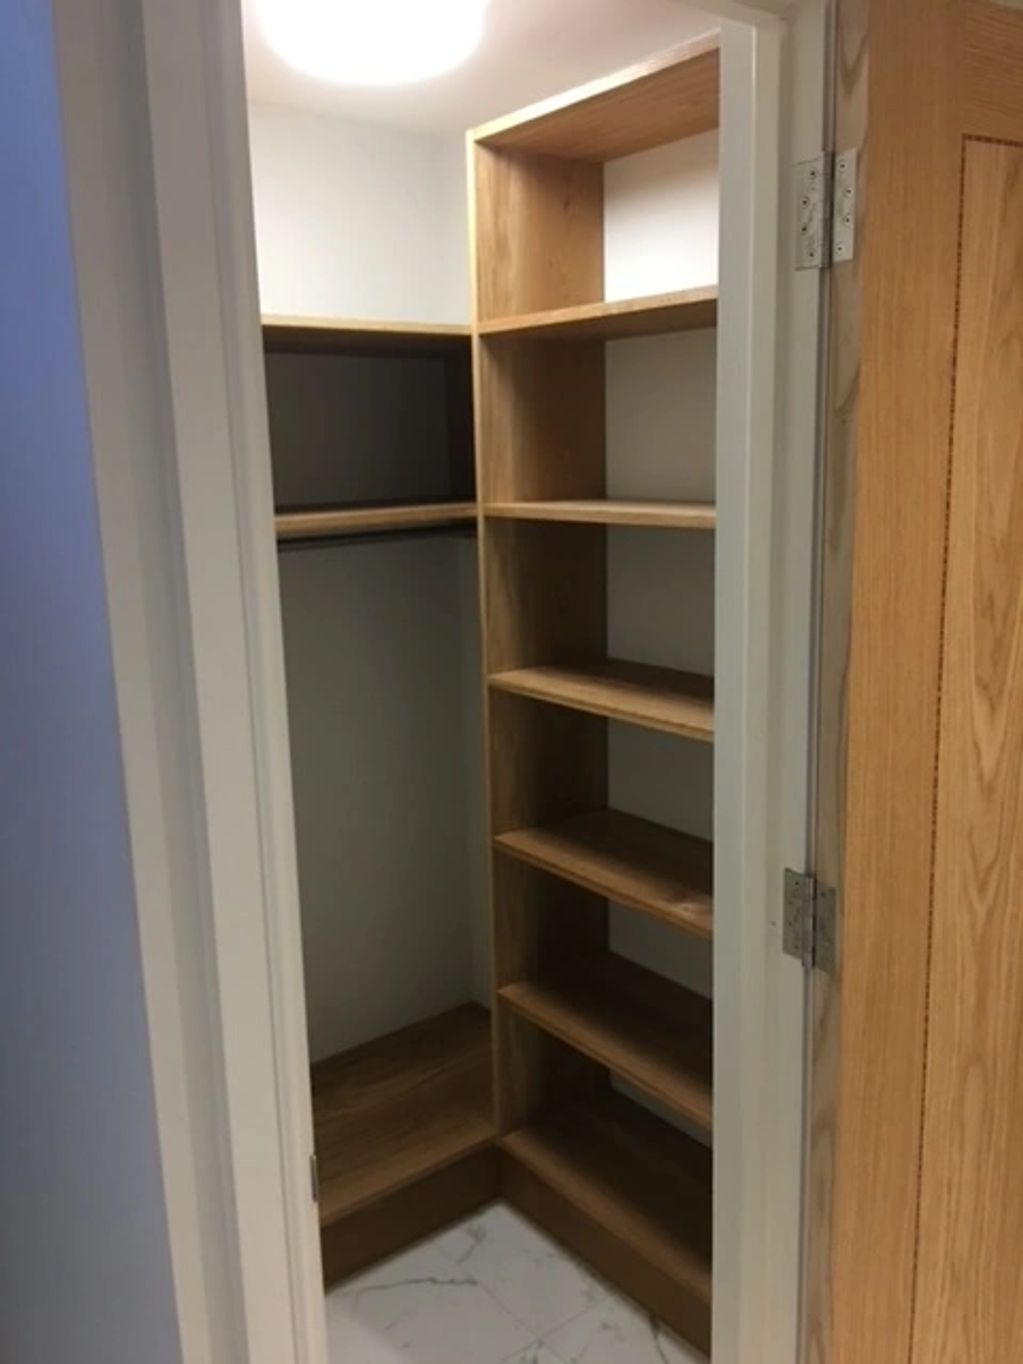 Cupboard spaces designed by you to maximise storage and suit your needs